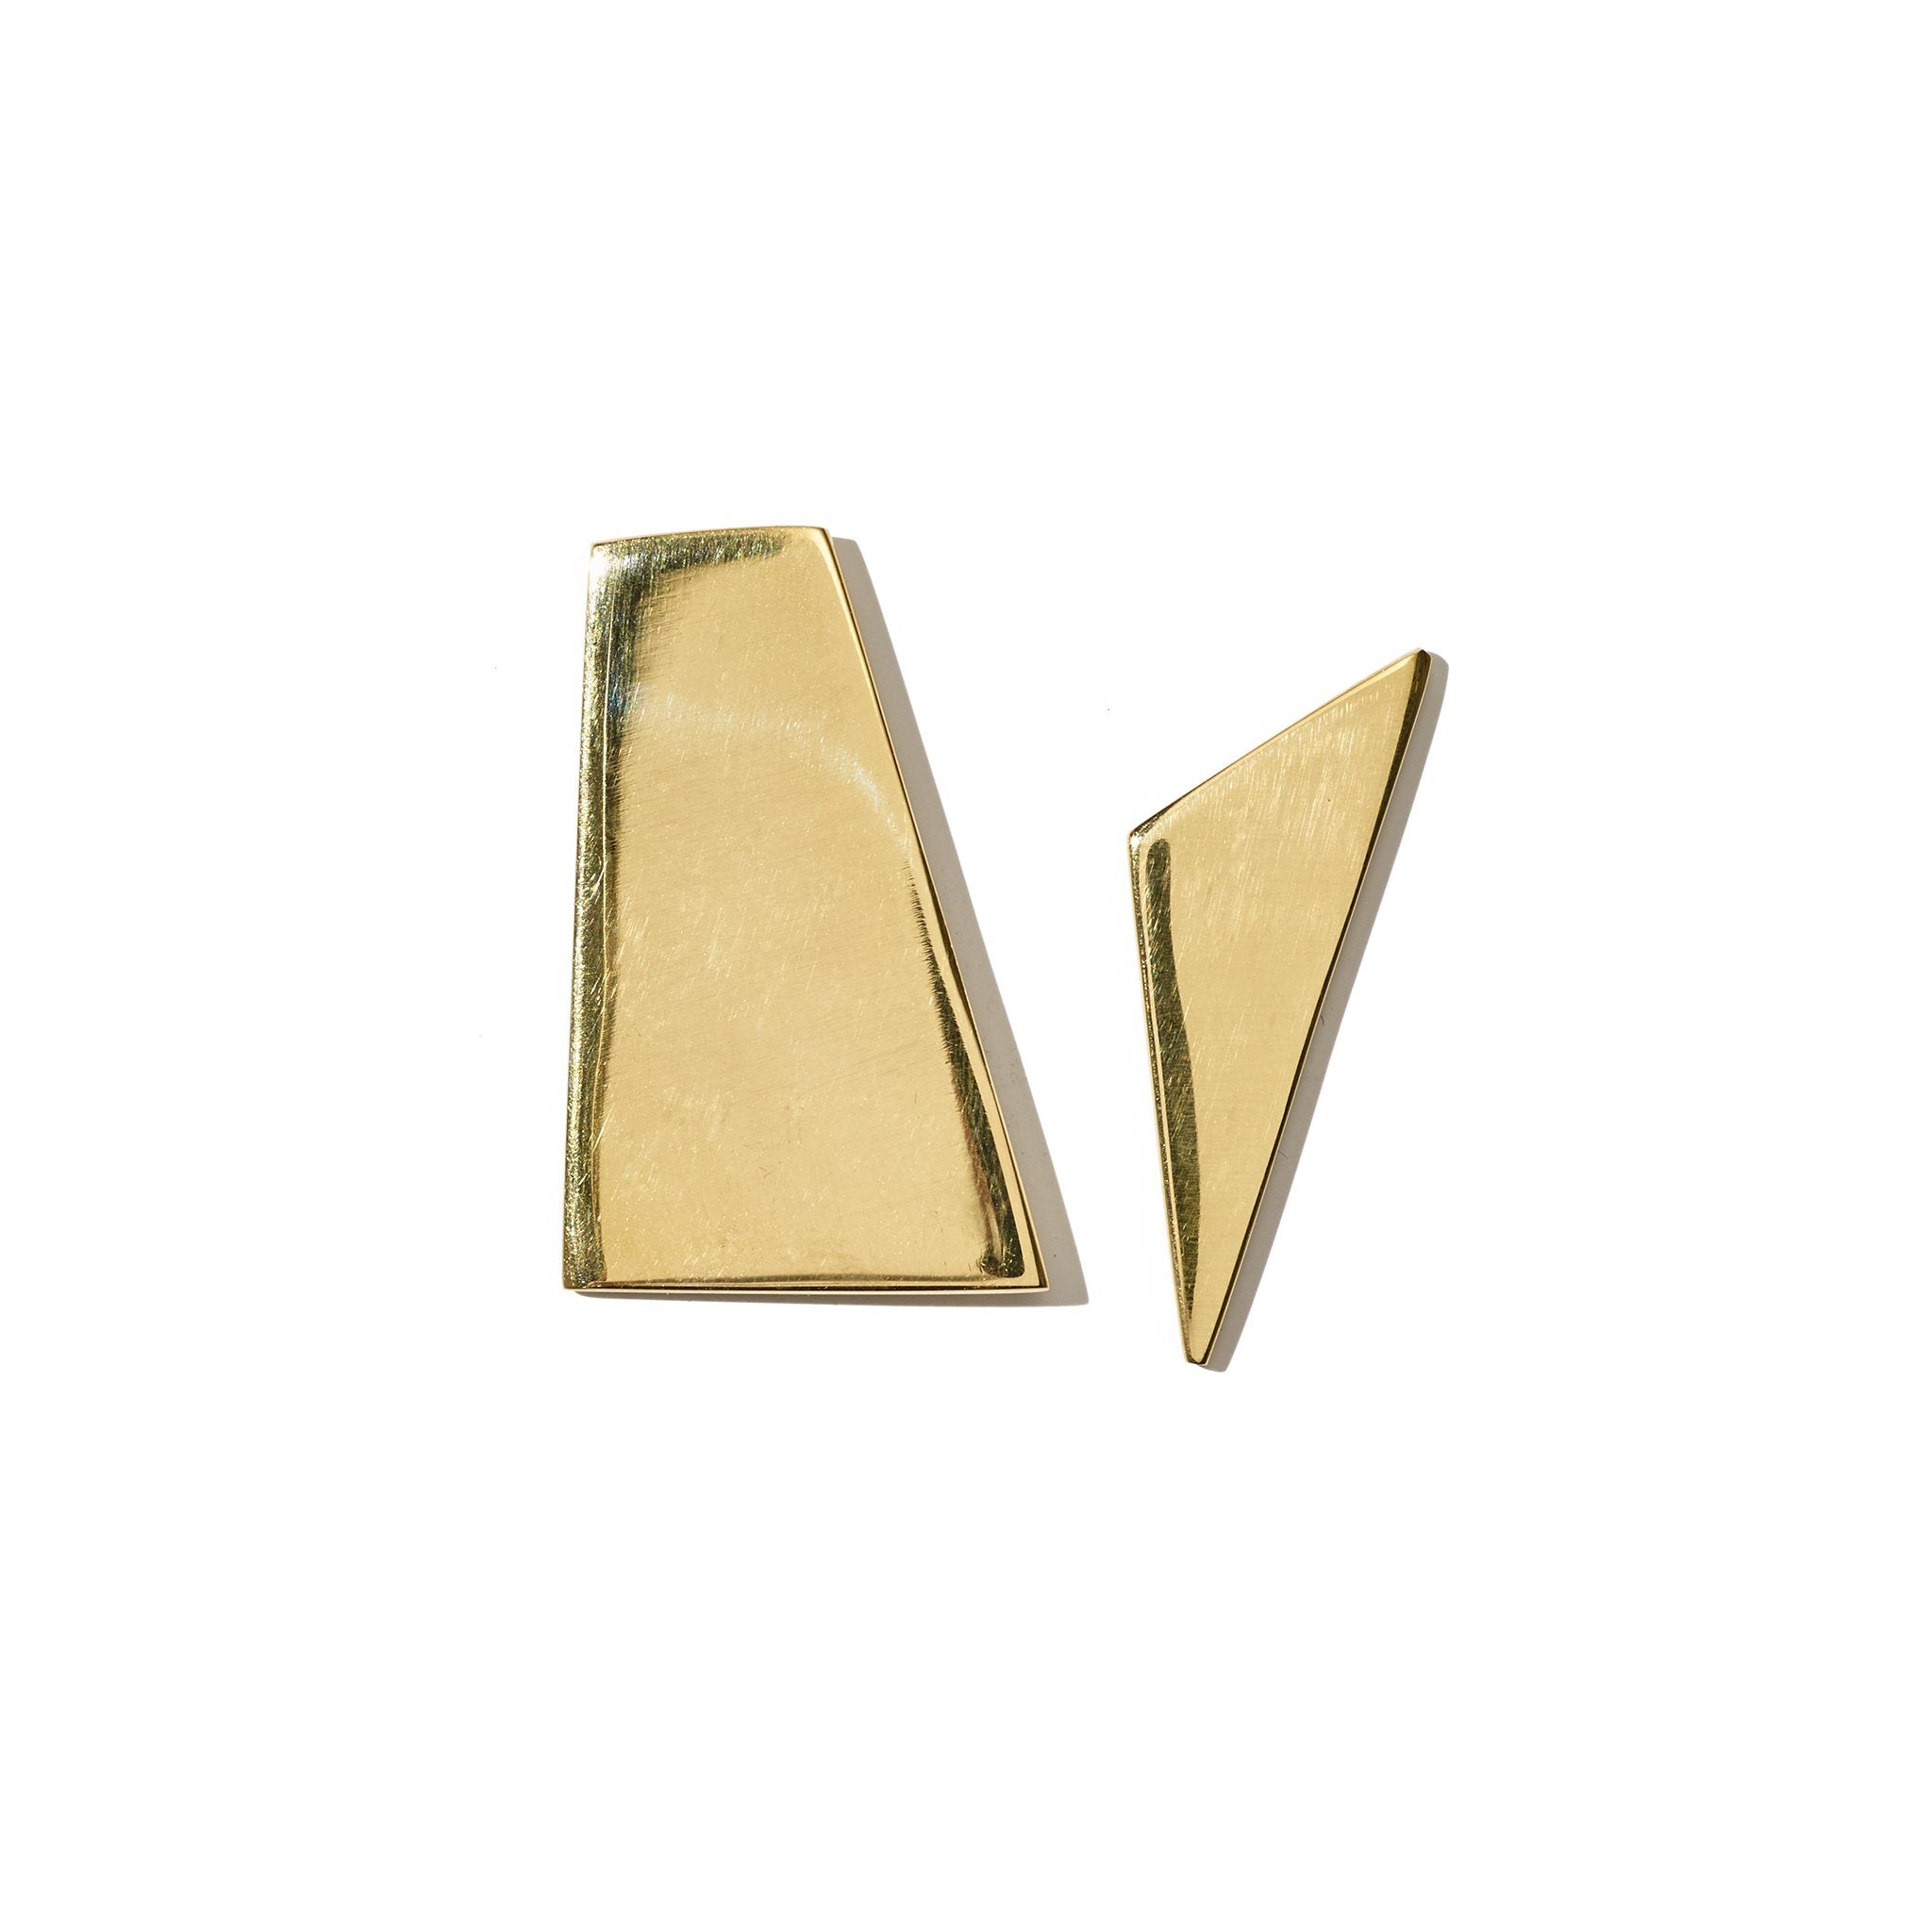 Modern and asymmetric stud earrings inspired by the work of Ellsworth Kelly and handcrafted from upcycled brass.